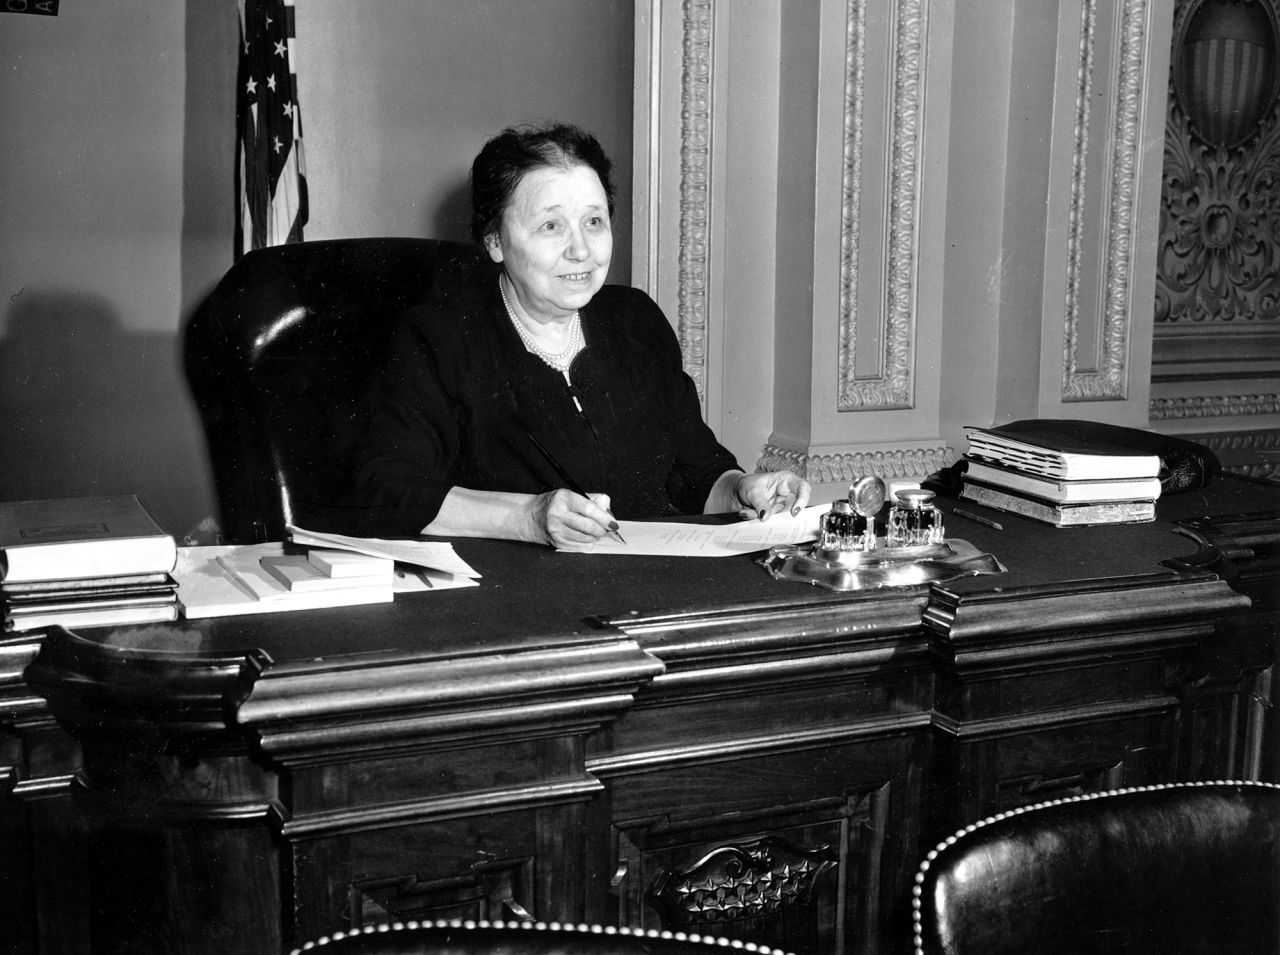 US Sen. Hattie Caraway signs legislation on October 19, 1943, making history as the first woman to take up the gavel as the Senate's presiding officer. Caraway, who represented Arkansas, first entered the Senate by appointment after her husband, US Sen. Thad Caraway, died. After serving in her husband's place, Caraway surprised party leaders by declaring her own candidacy for a full term. She won the election in a landslide, becoming the first woman elected to the Senate.